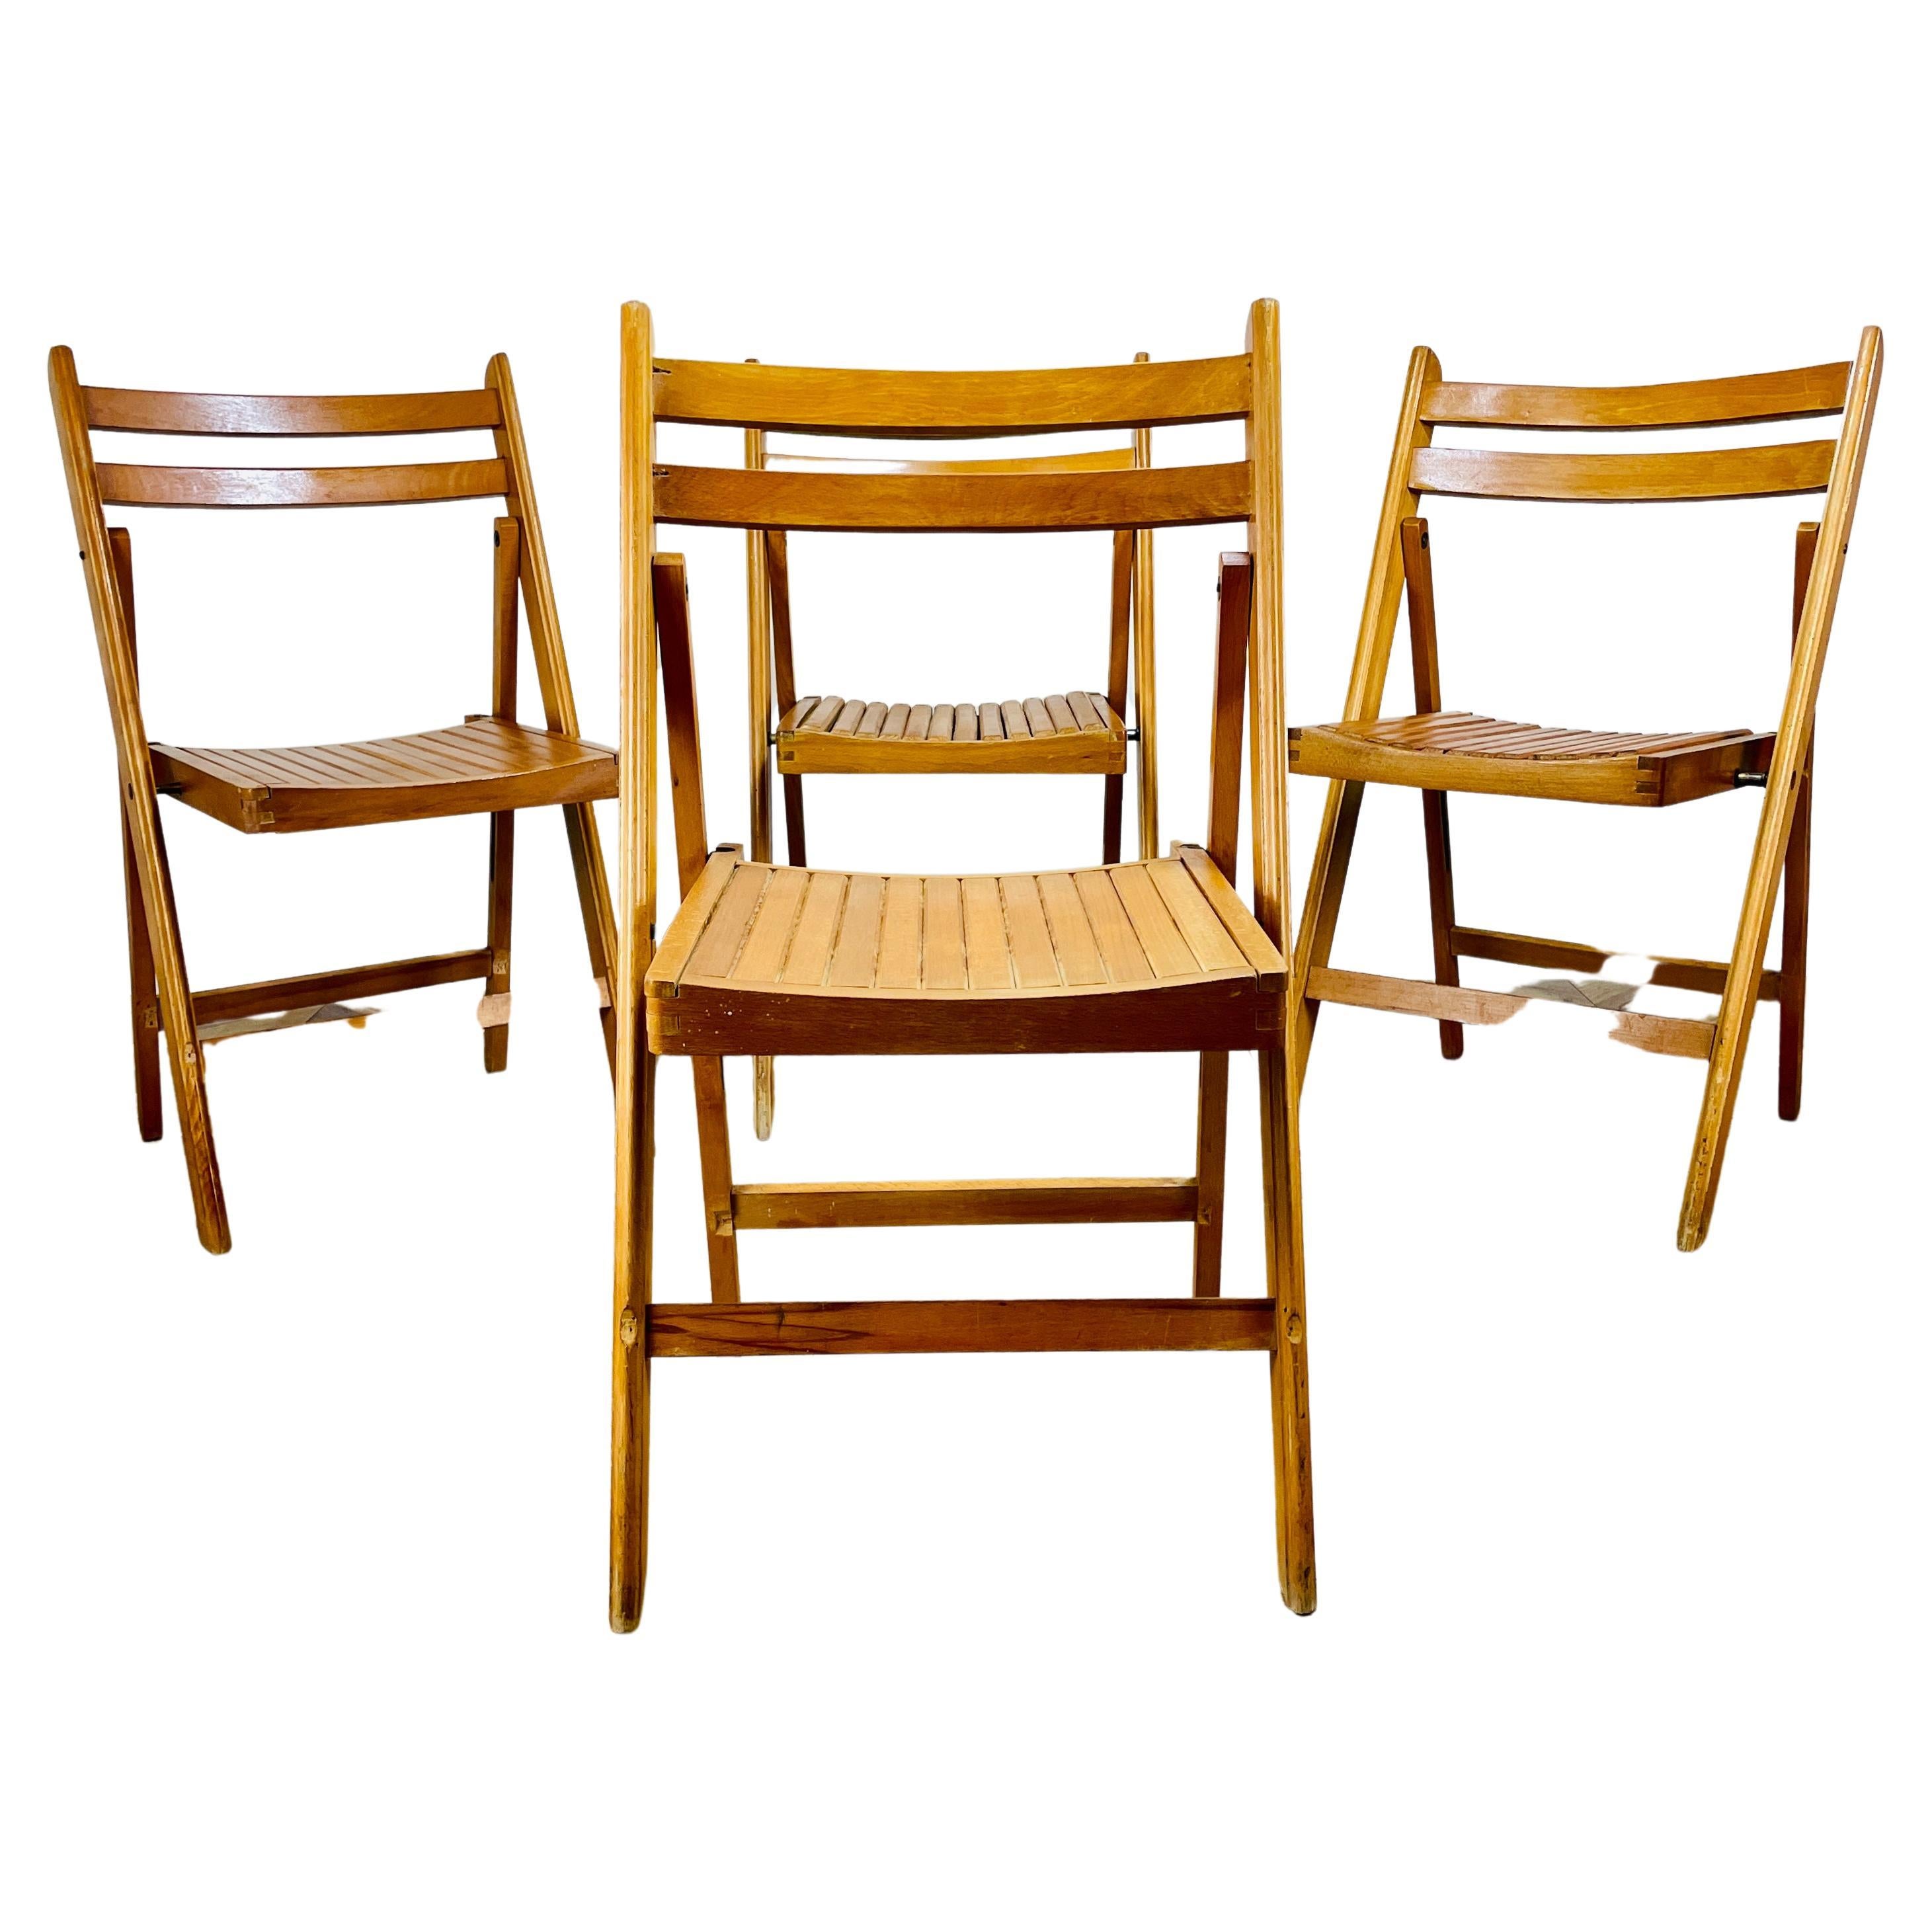 Vintage Wooden Folding Chairs by Centa, Set of 4, 1960s